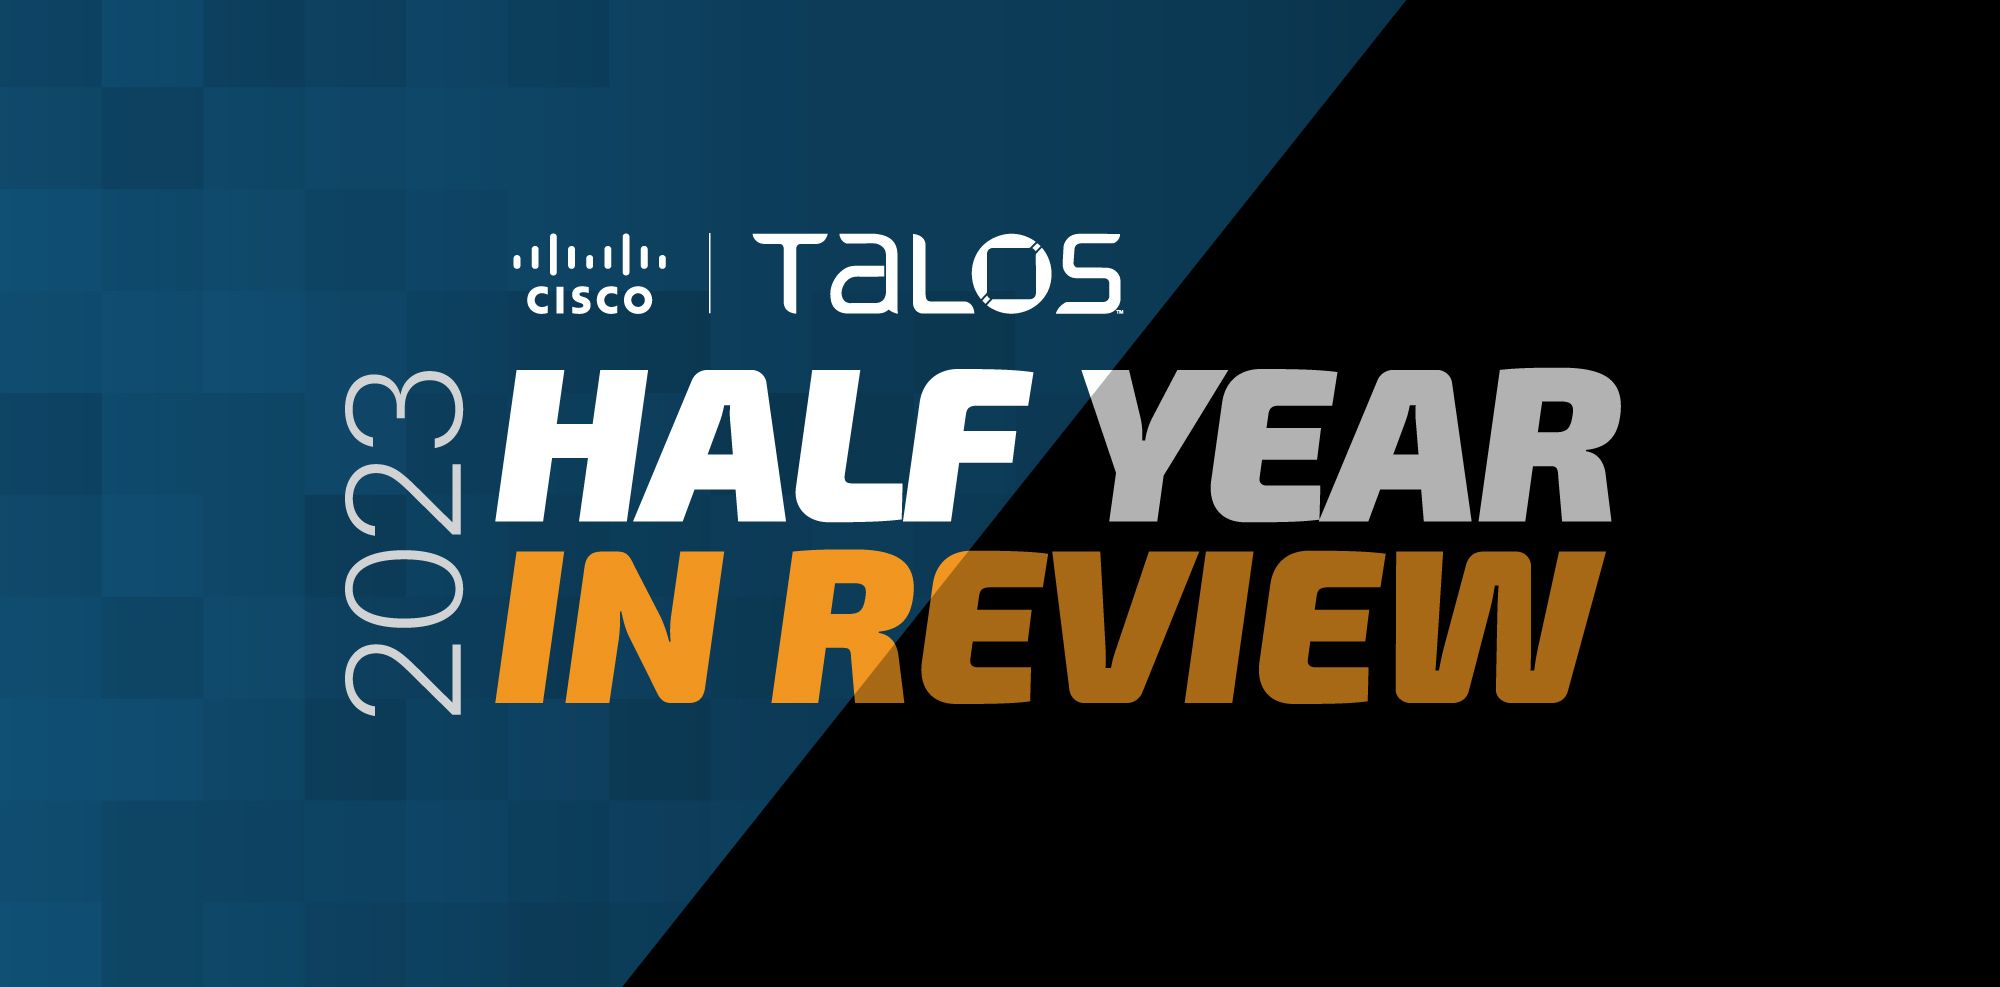 Half-Year in Review: Recapping the top threats and security trends so far in 2023